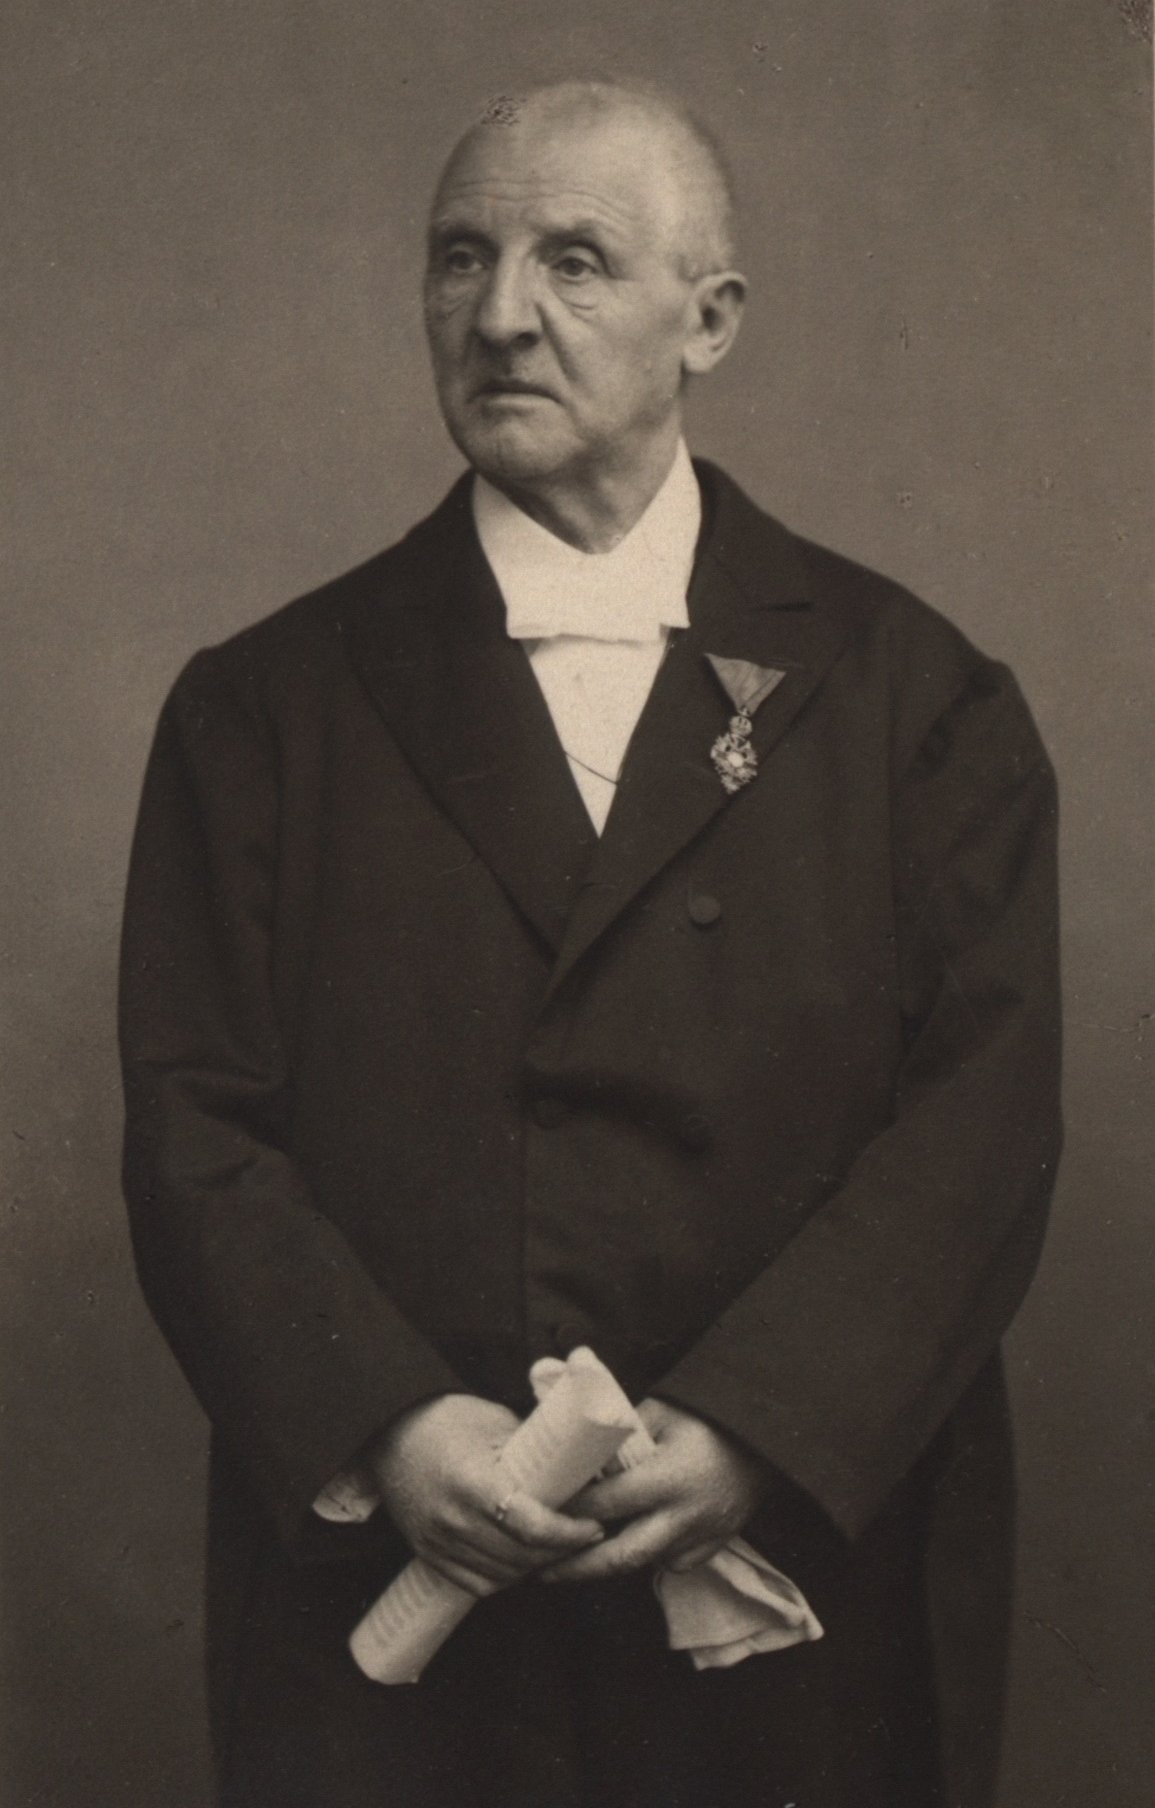 Portrait of Anton Bruckner. He is looking to his right side, holding documents in his hands.